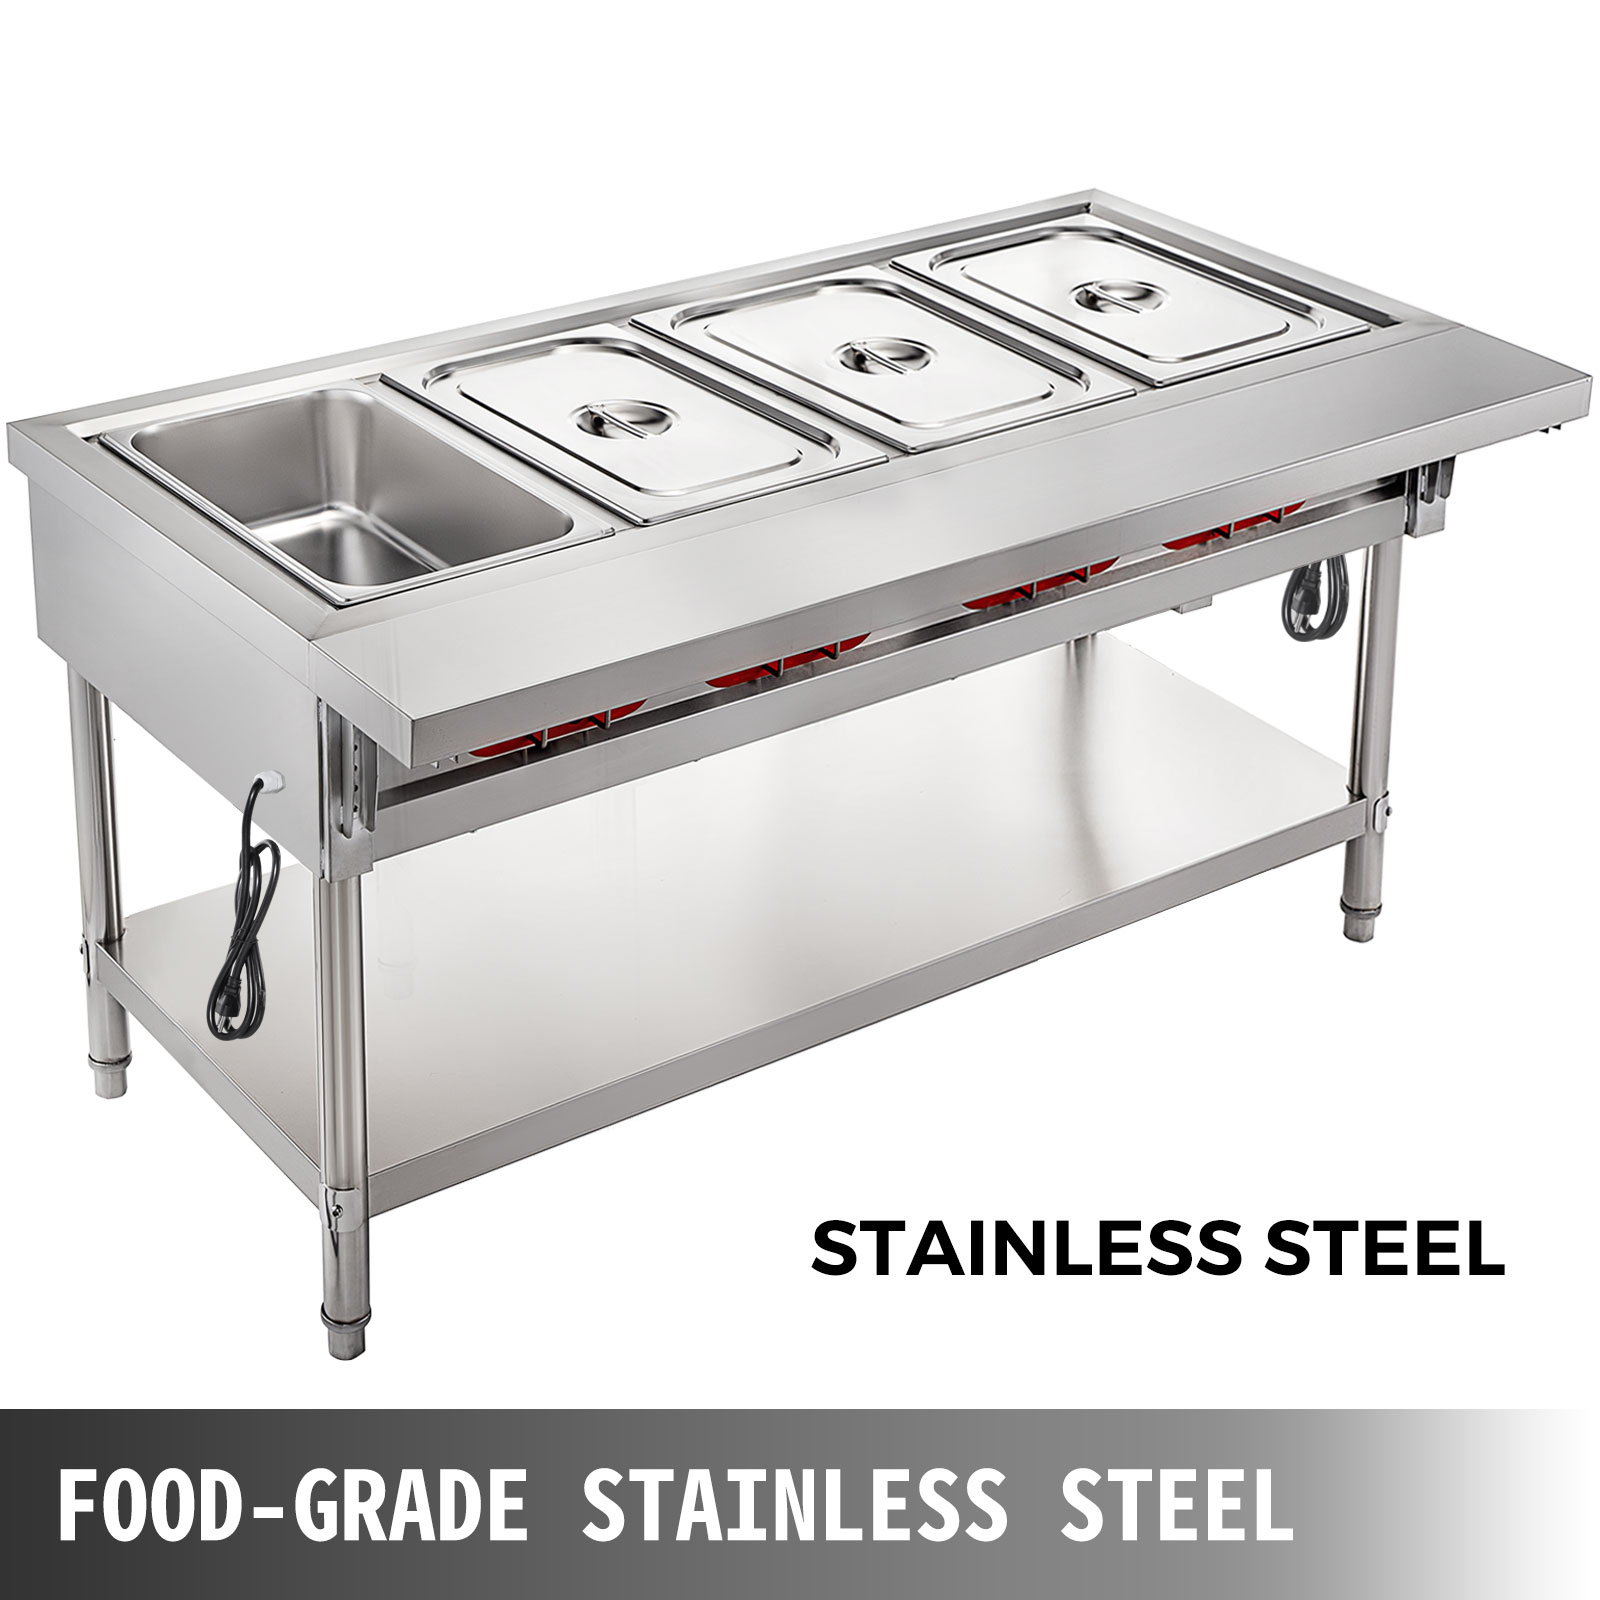 https://d2qc09rl1gfuof.cloudfront.net/product/CJRT4G2000W000001/commercial-steam-table-m100-2.jpg